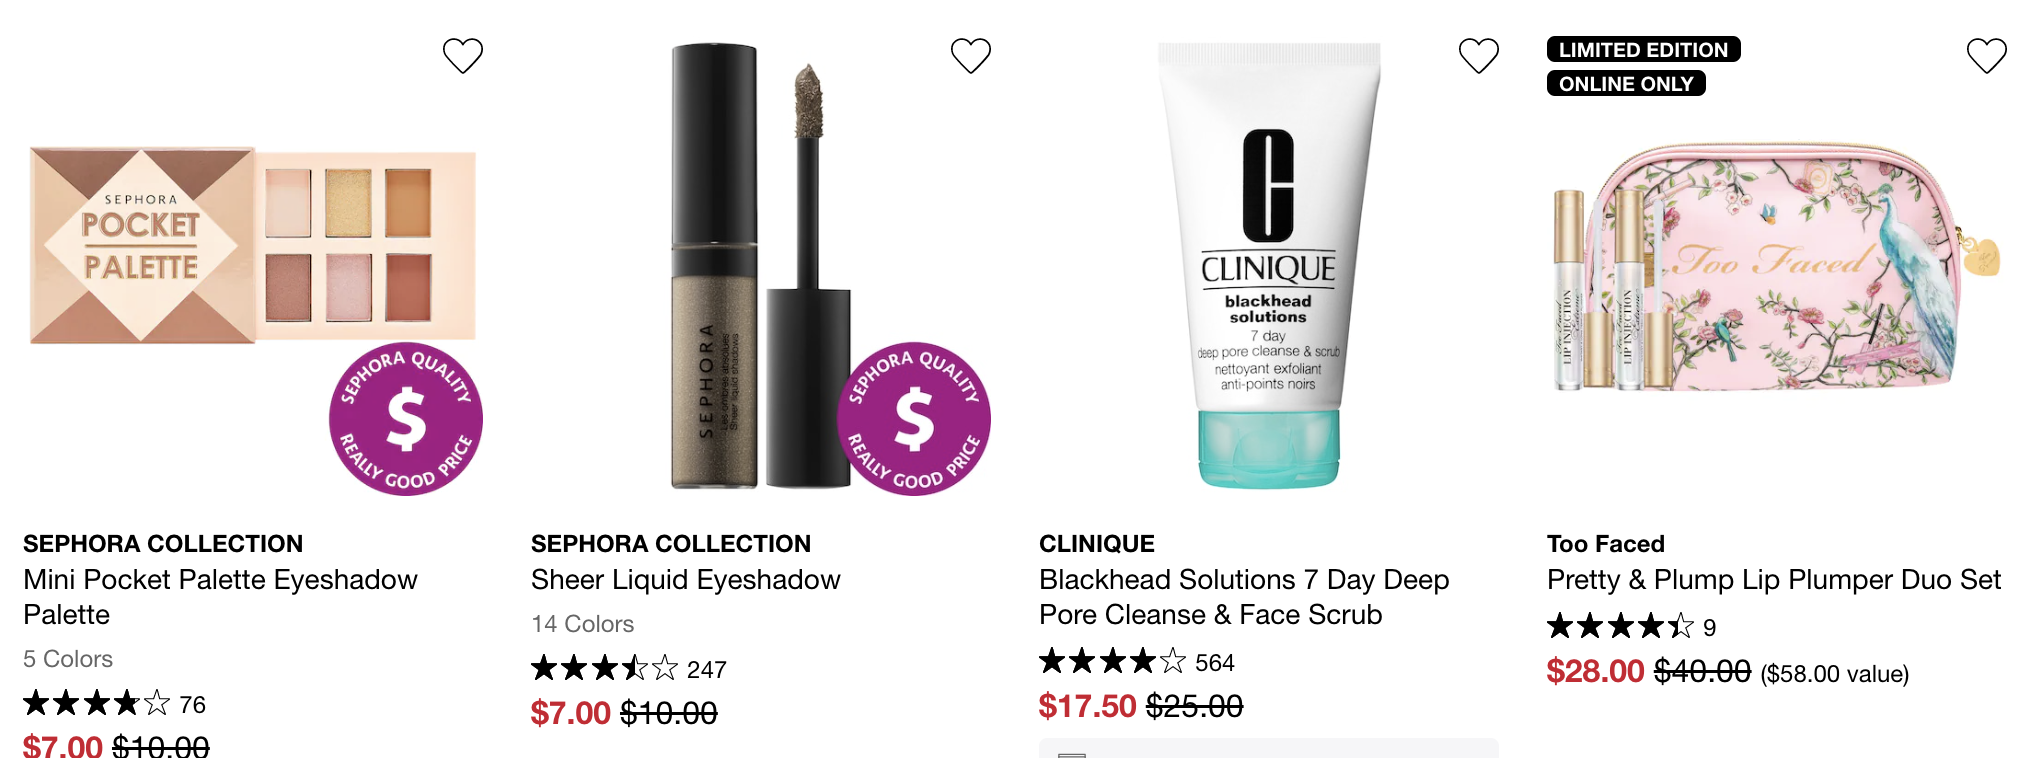 Sephora Up to 50 off Memorial Day Sale Gift With Purchase